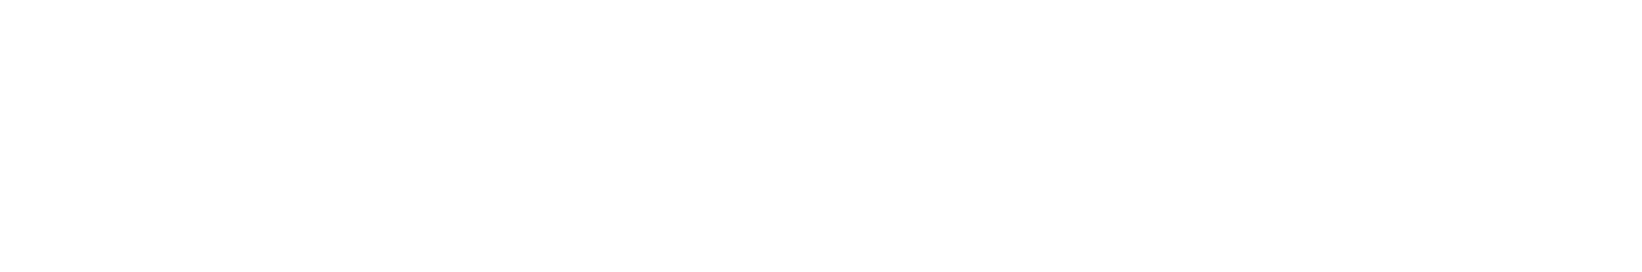 WH Smith logo large for dark backgrounds (transparent PNG)